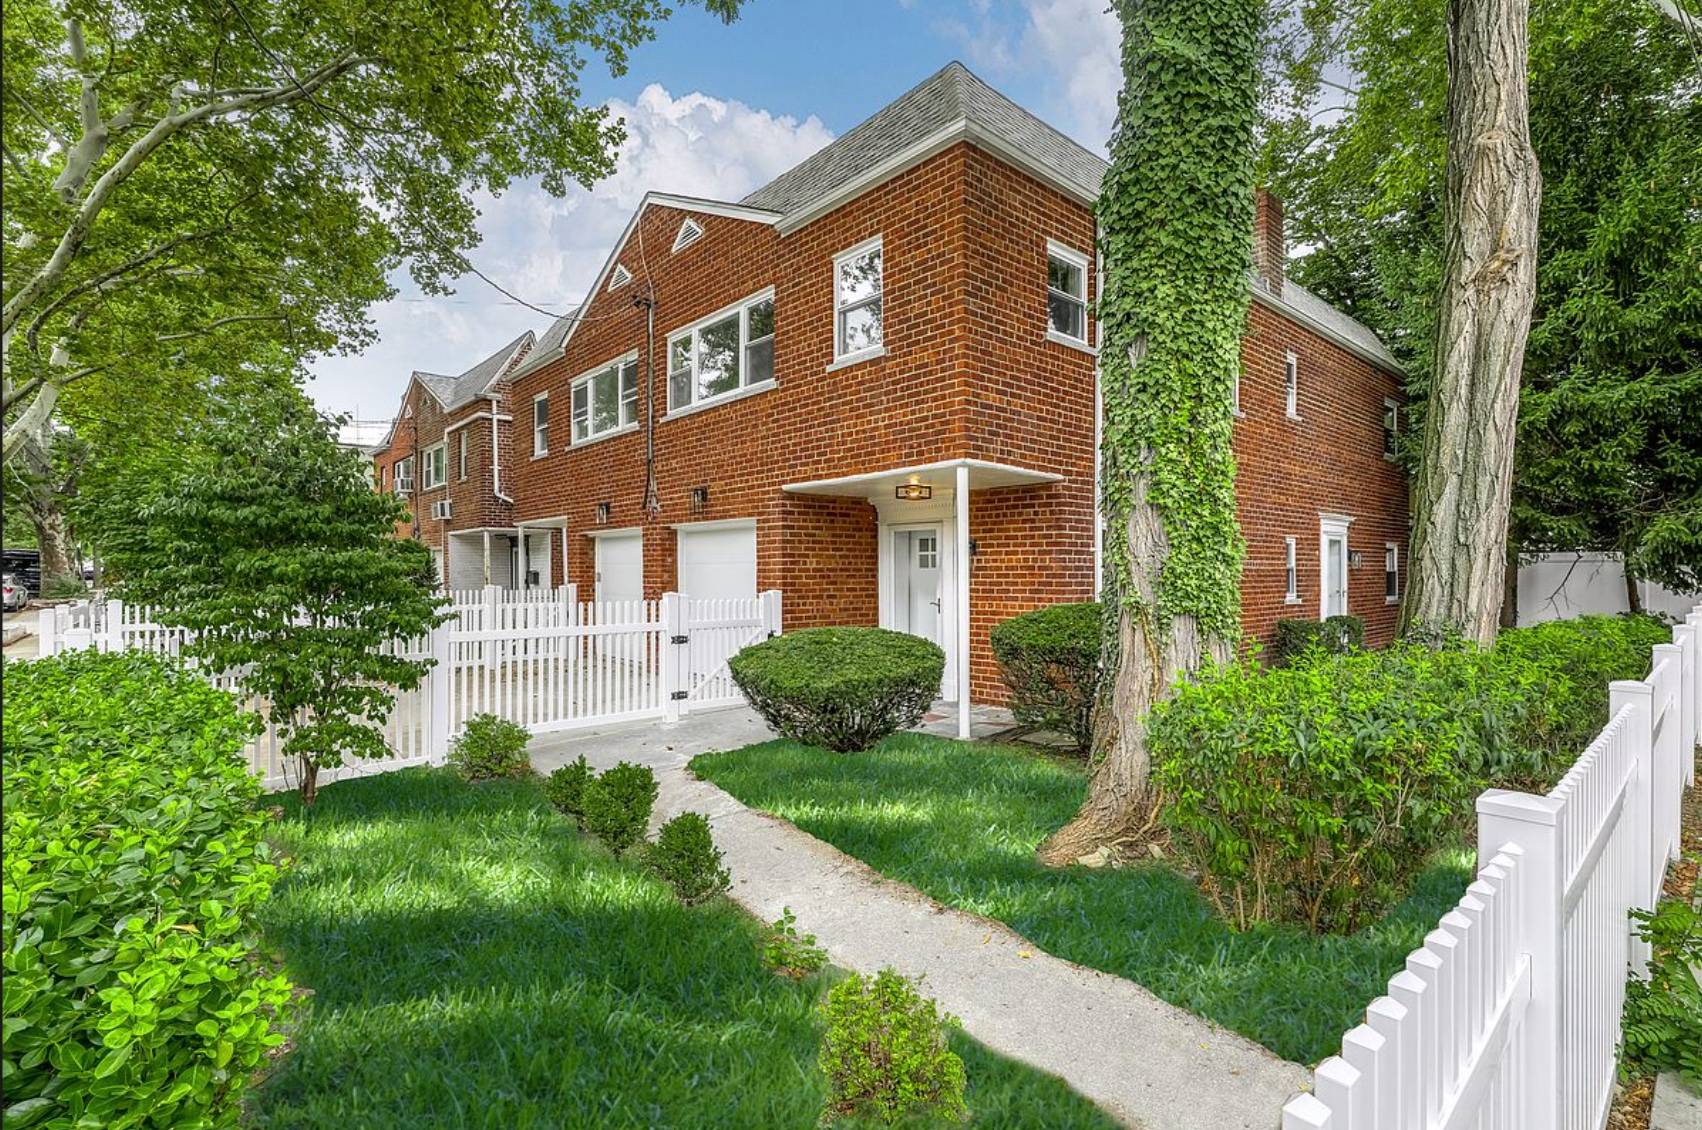 Sophistication meets perfection in this impeccably renovated, classic, all brick home.